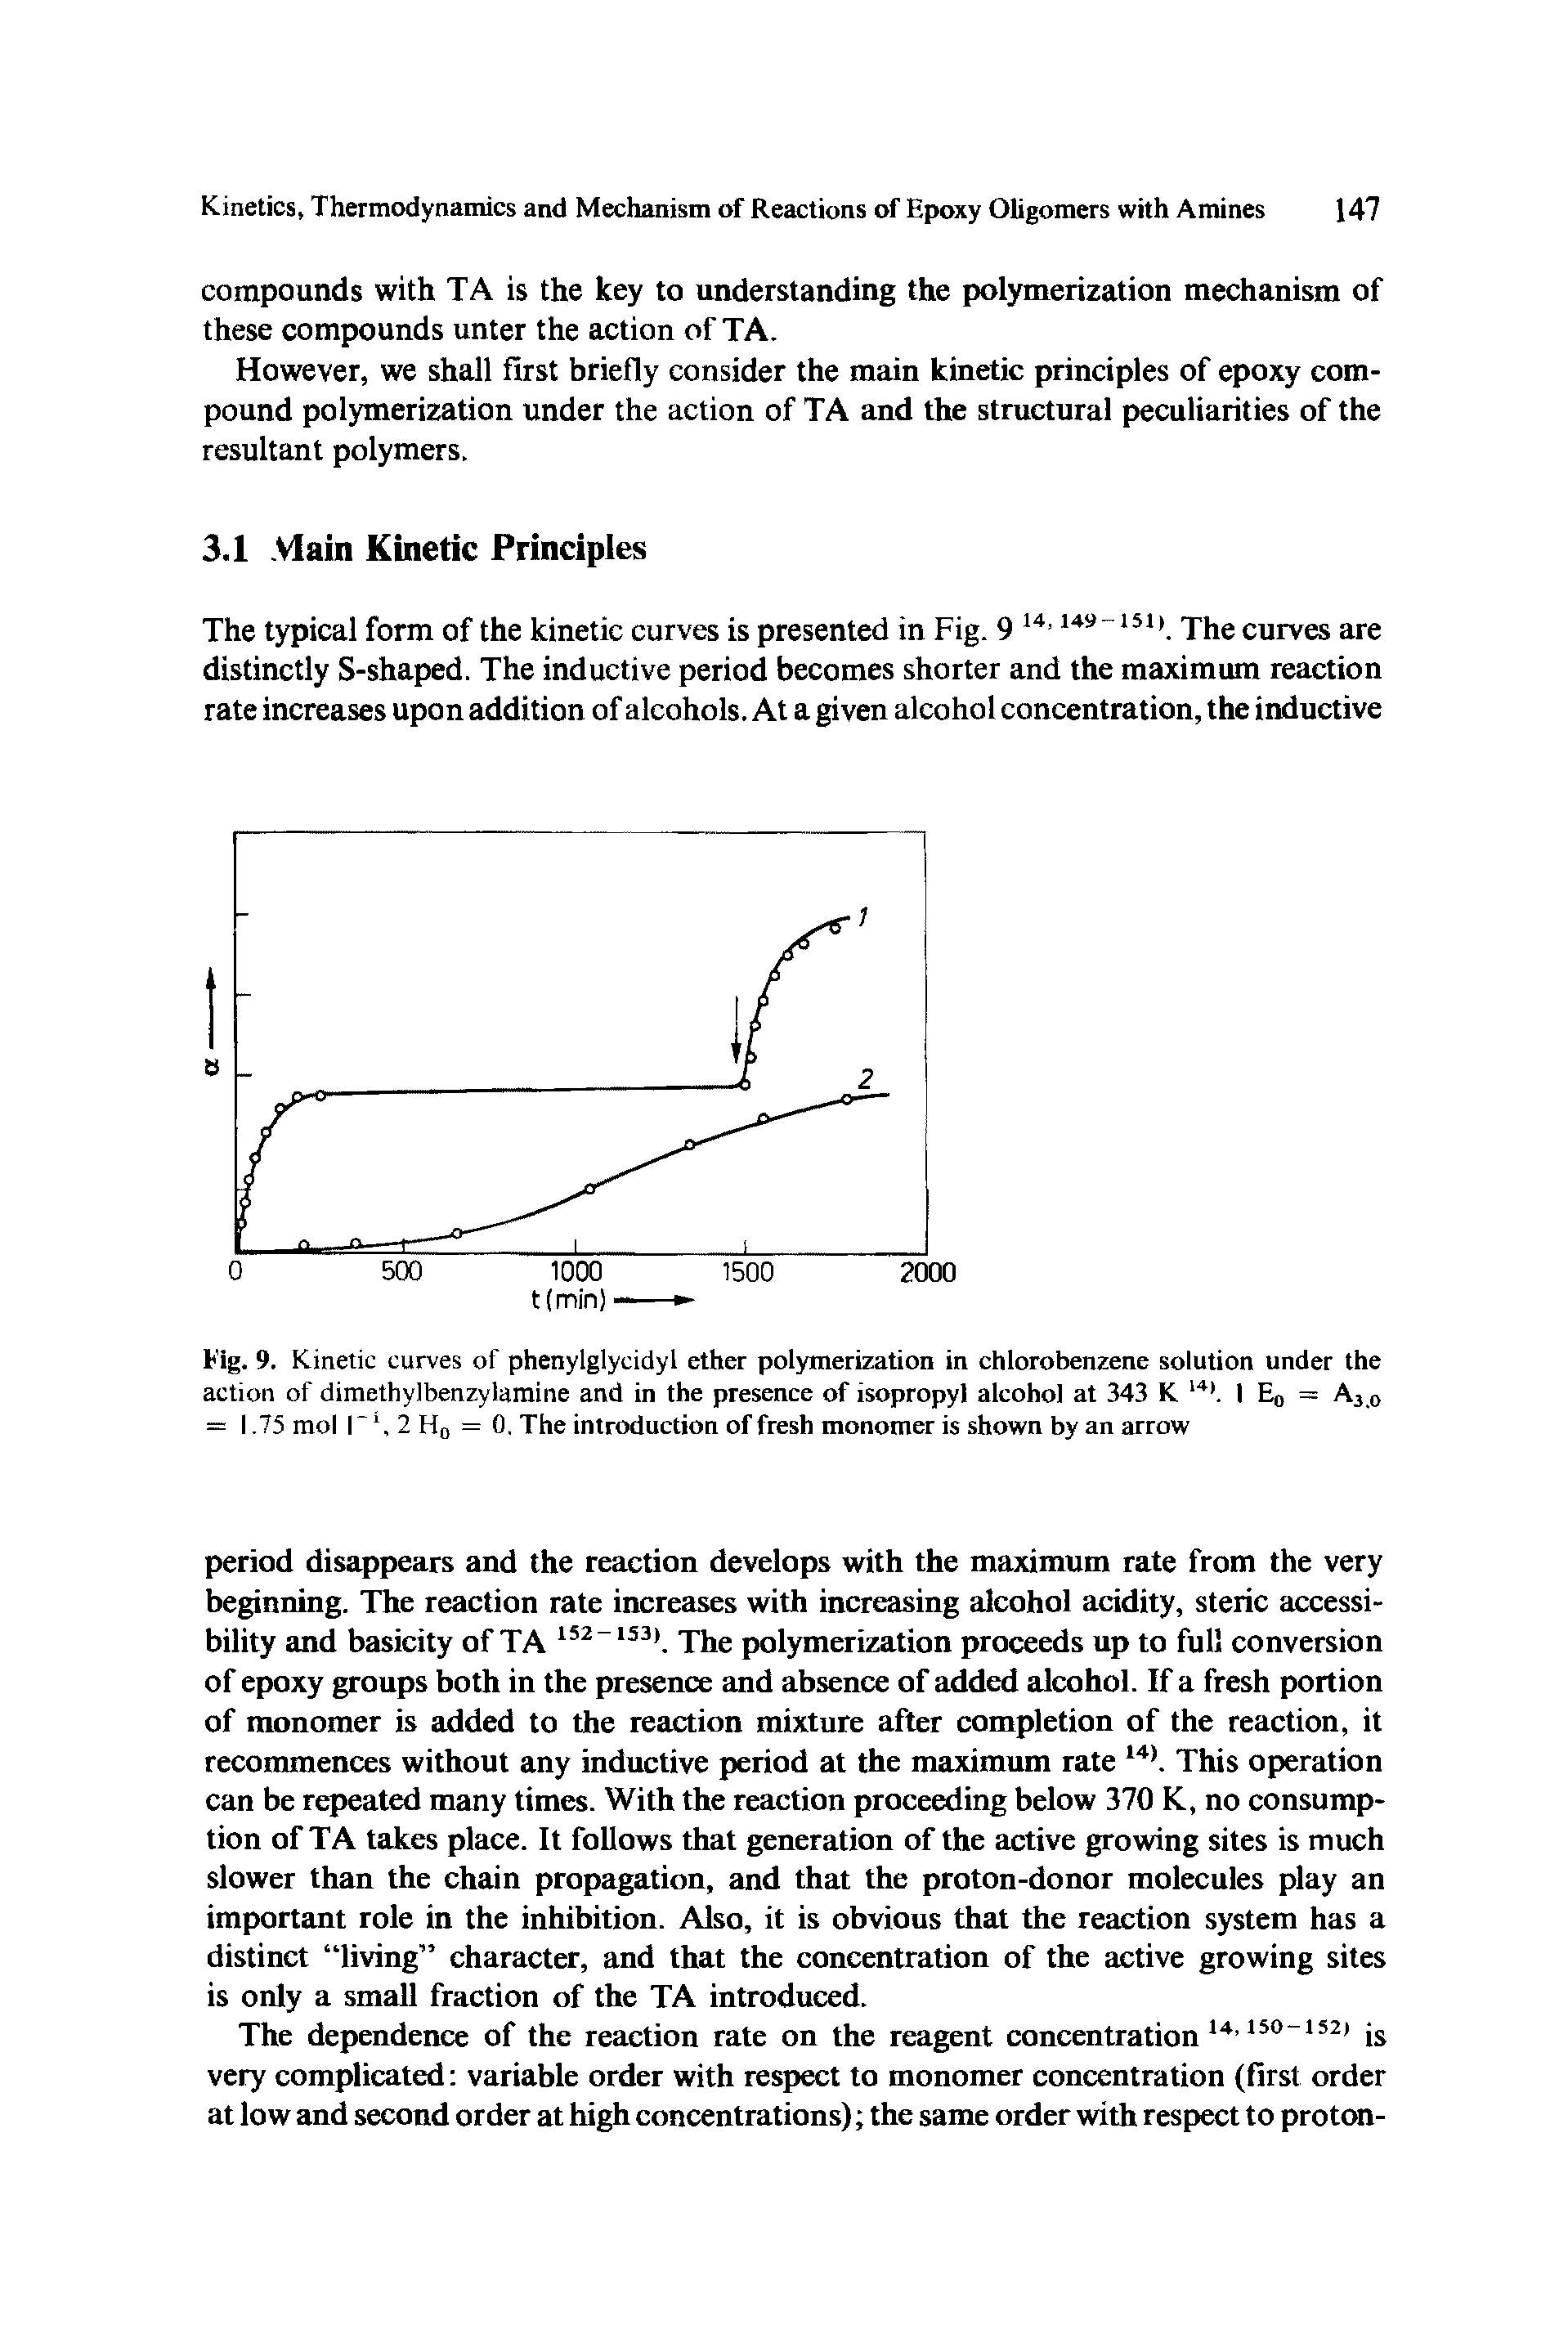 Fig. 9. Kinetic curves of phenylglycidyl ether polymerization in chlorobenzene solution under the action of dimethylbenzylamine and in the presence of isopropyl alcohol at 343 K 14). 1 E0 = A3 0 = 1.75 mol r, 2H0 = 0. The introduction of fresh monomer is shown by an arrow...